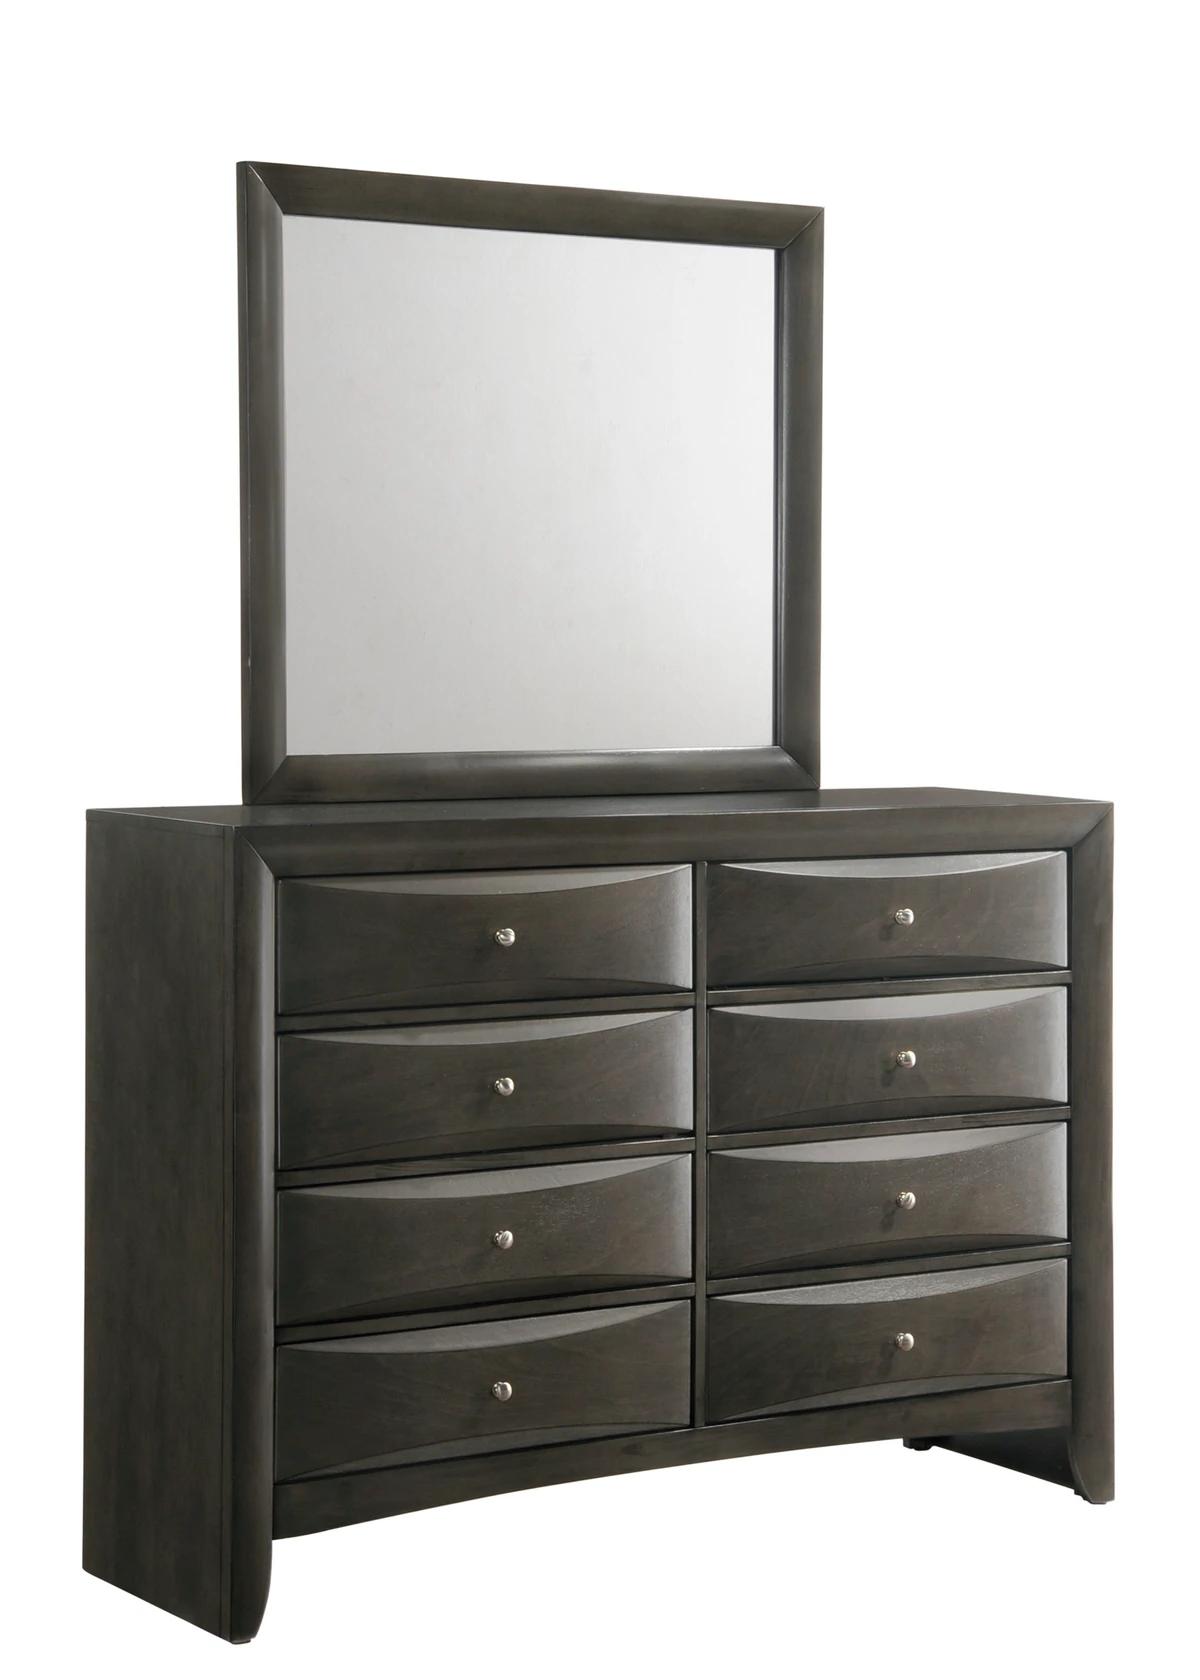 Gray Storage Bedroom Set By Crown Mark Emily B4275 Q Bed 6pcs Buy Online On Ny Furniture Outlet 